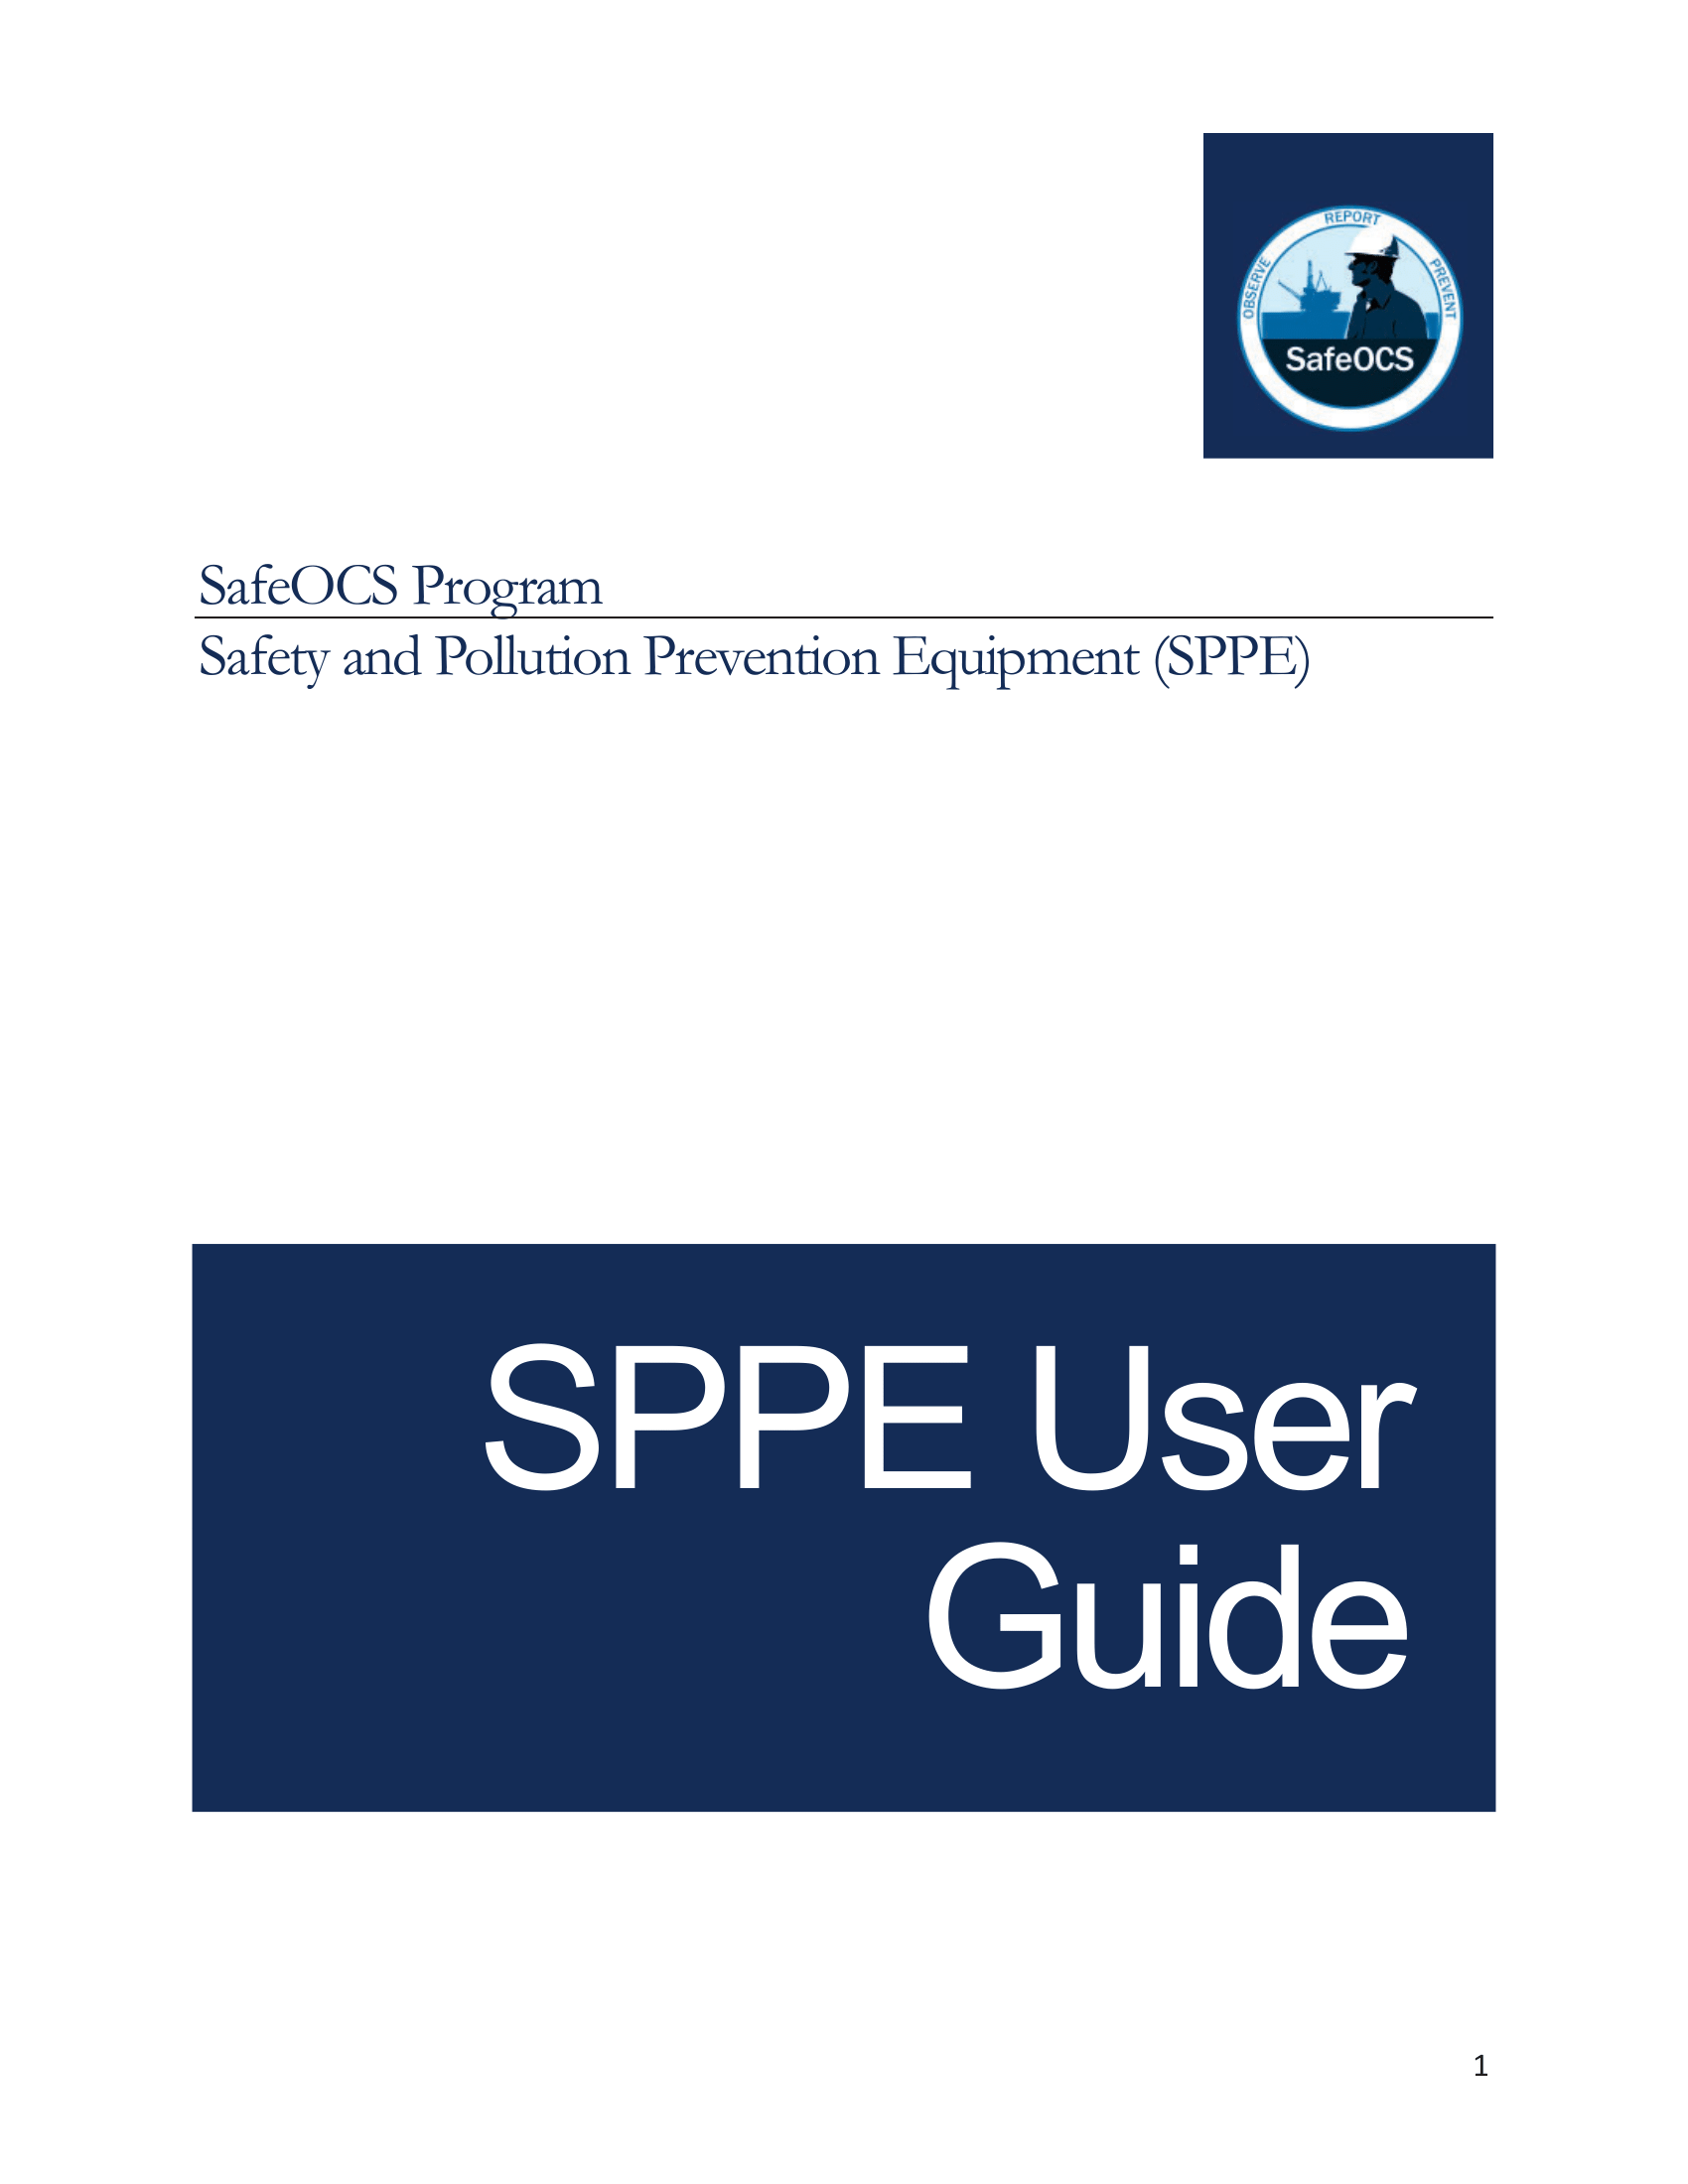 SPPE Briefing cover